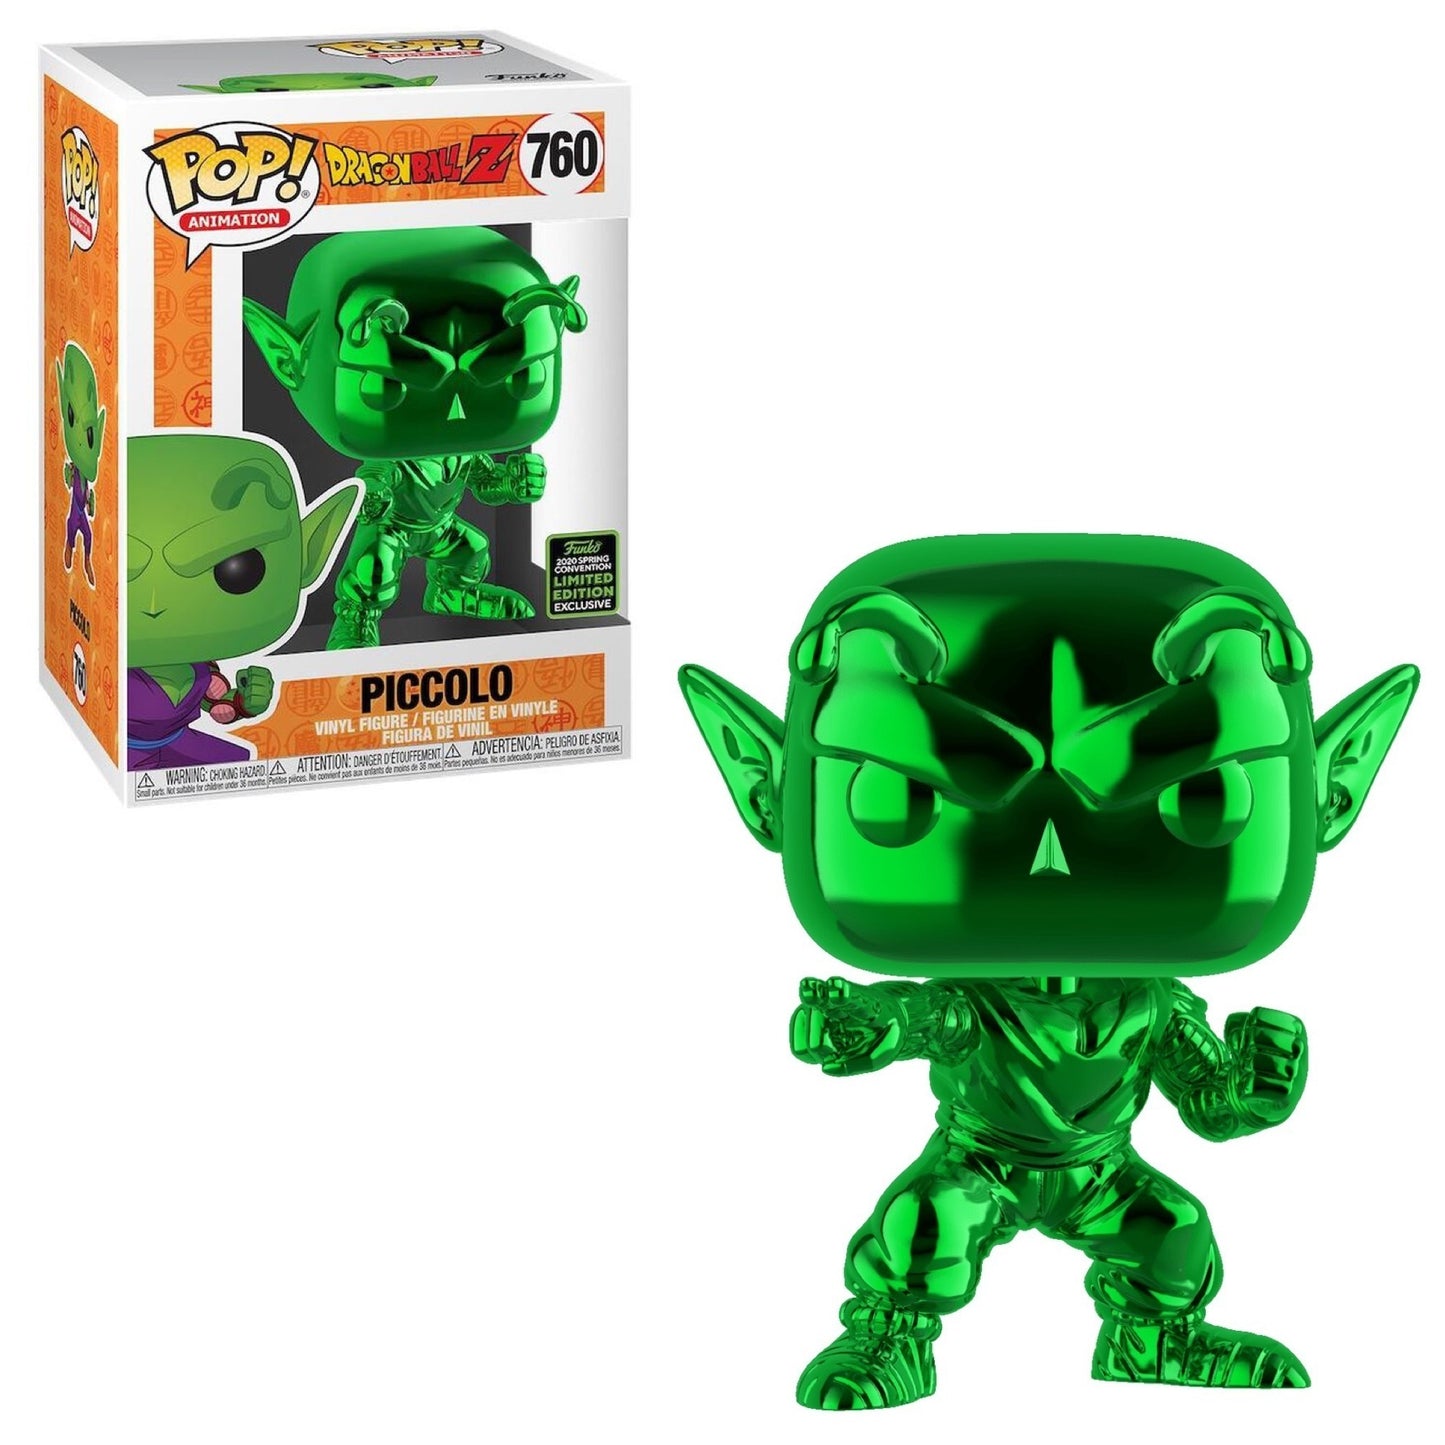 Piccolo (Green Chrome) 2020 Spring Convention Limited Edition Shared Exclusive - FYE Funko PoP! 760 + PoP Protector